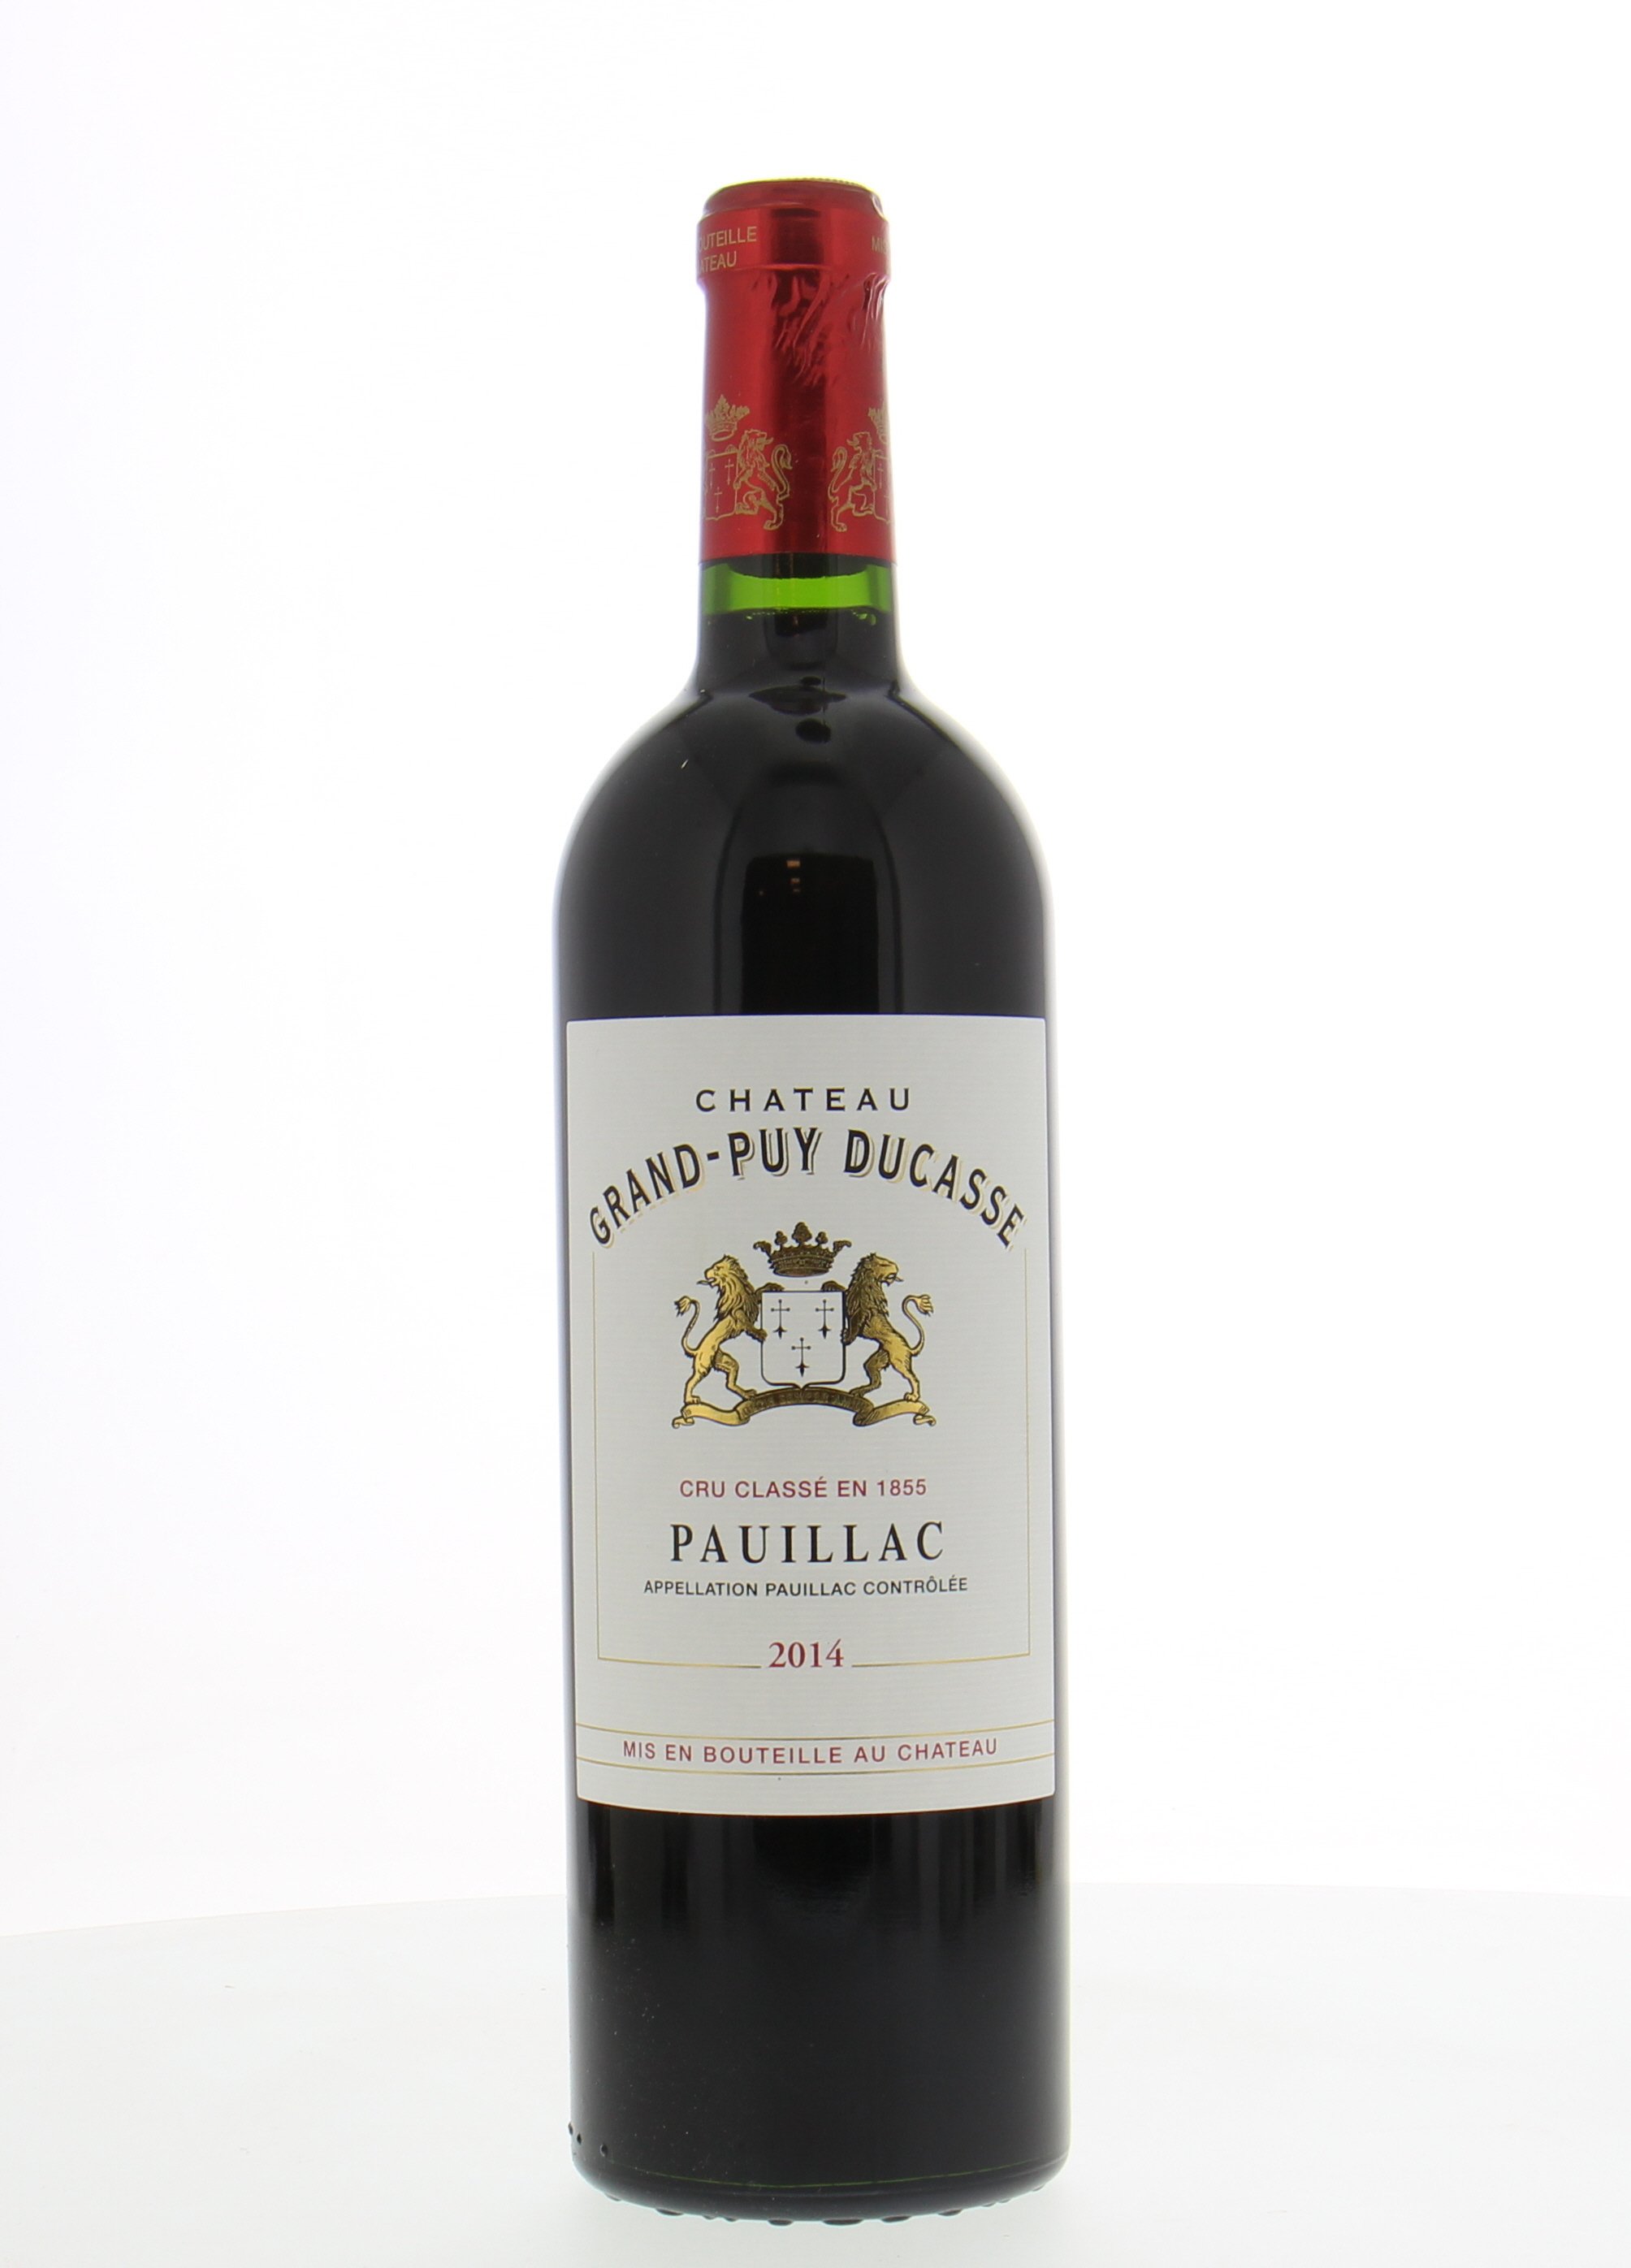 Chateau Grand Puy Ducasse - Chateau Grand Puy Ducasse 2014 From Original Wooden Case